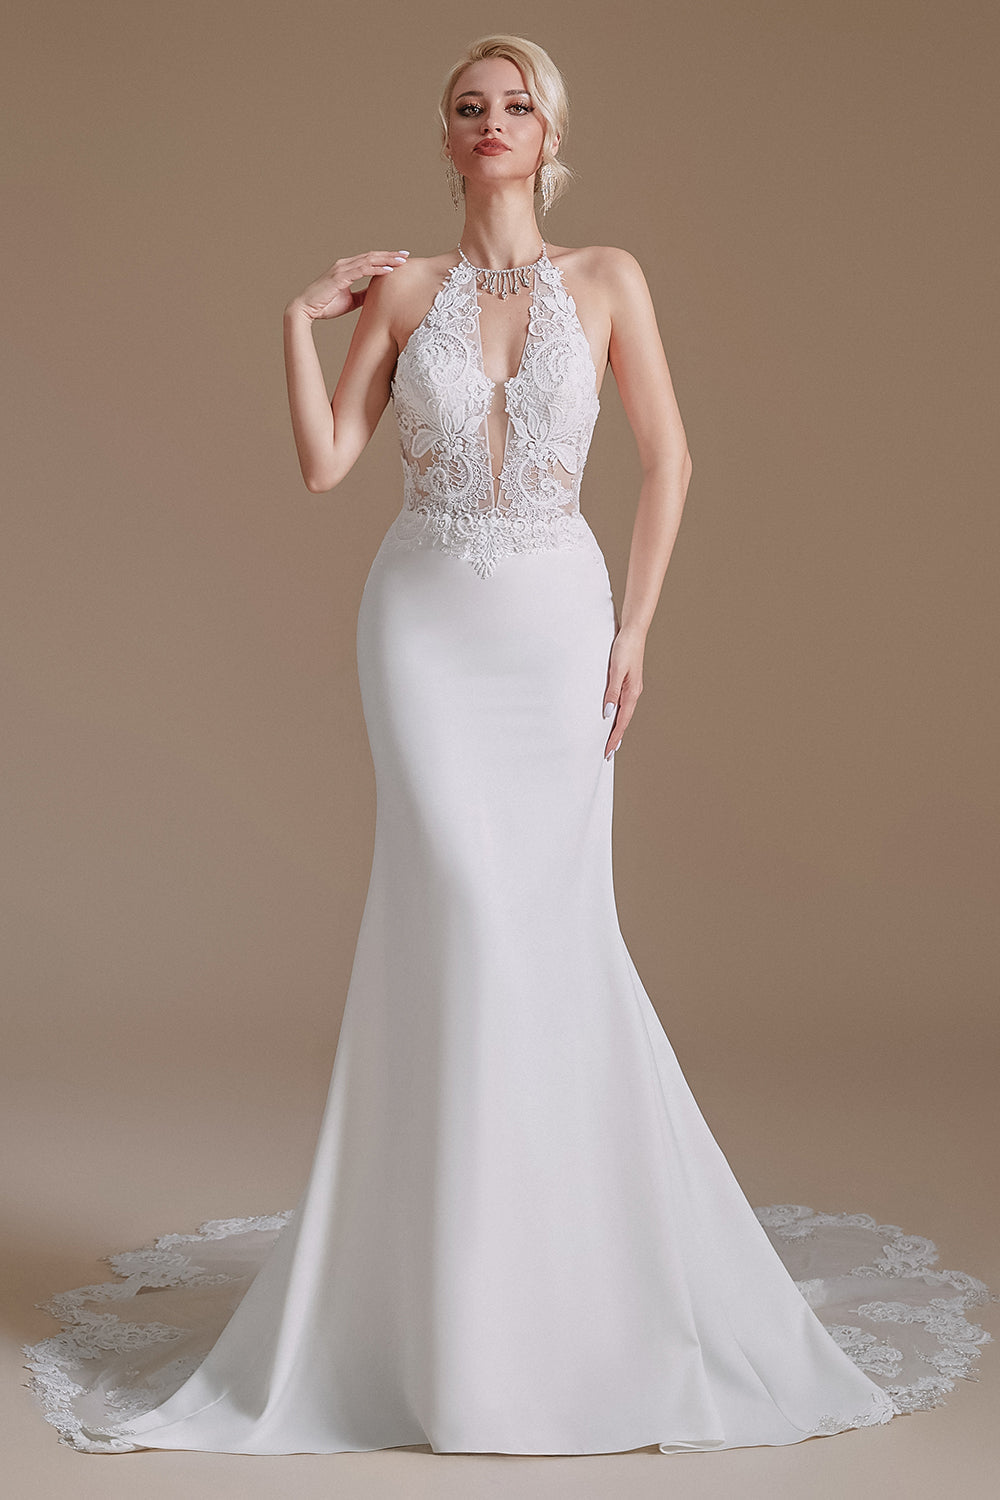 White Mermaid Halter Backless Sweep Train Wedding Dress with Lace